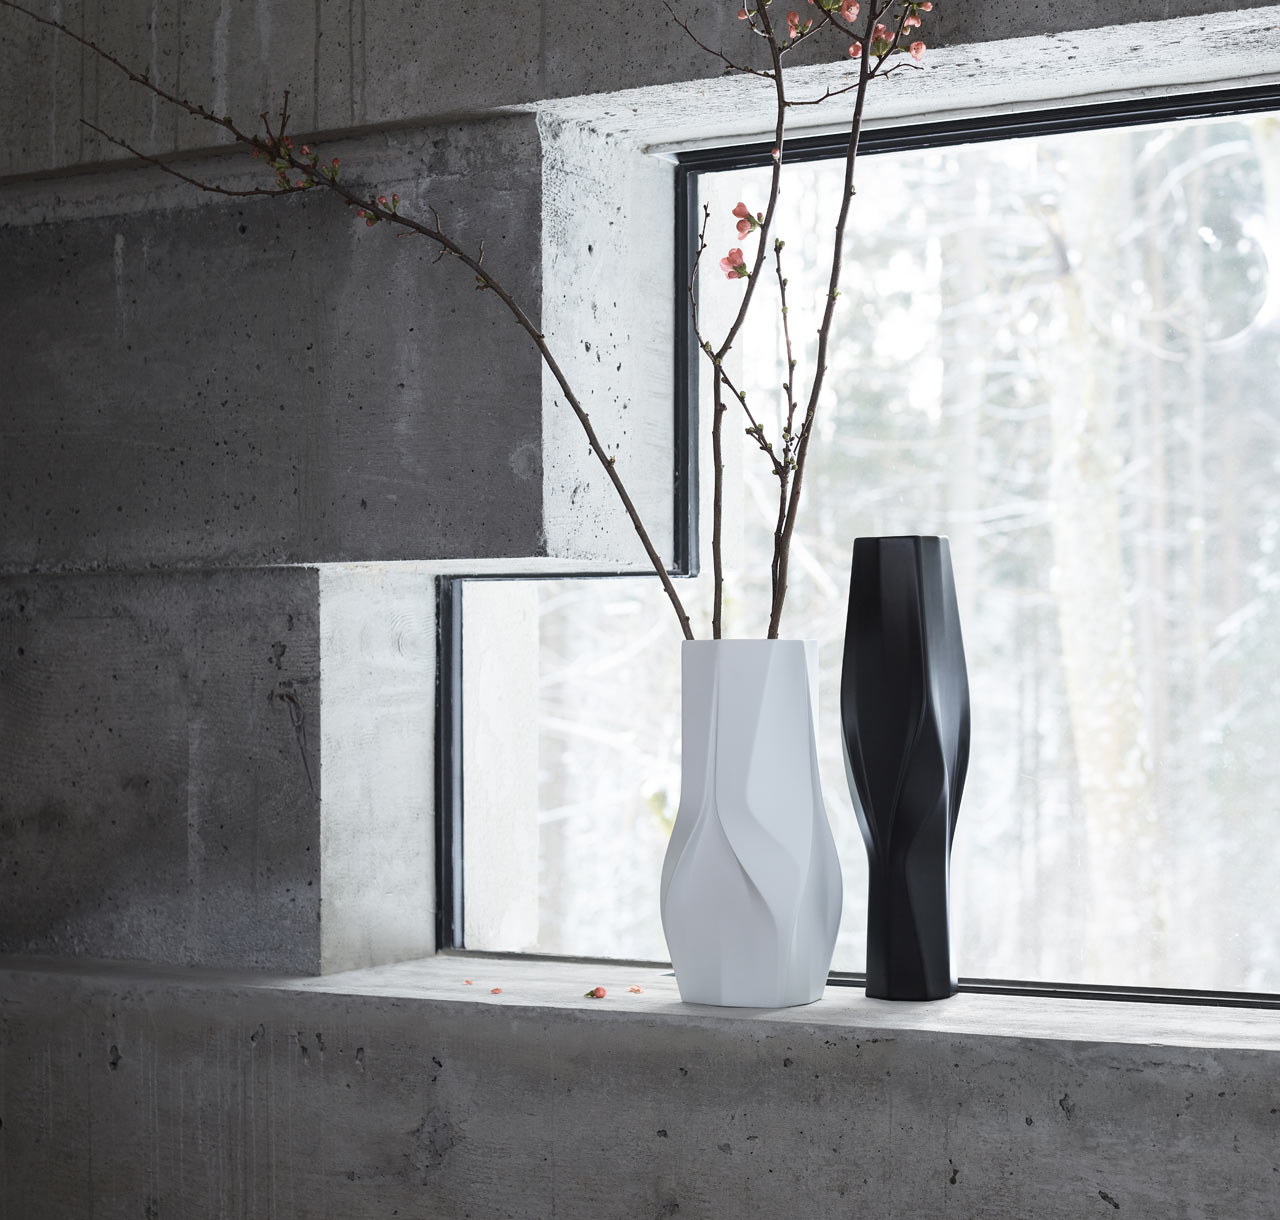 Zaha Hadid Design Releases New Porcelain Collections for Rosenthal